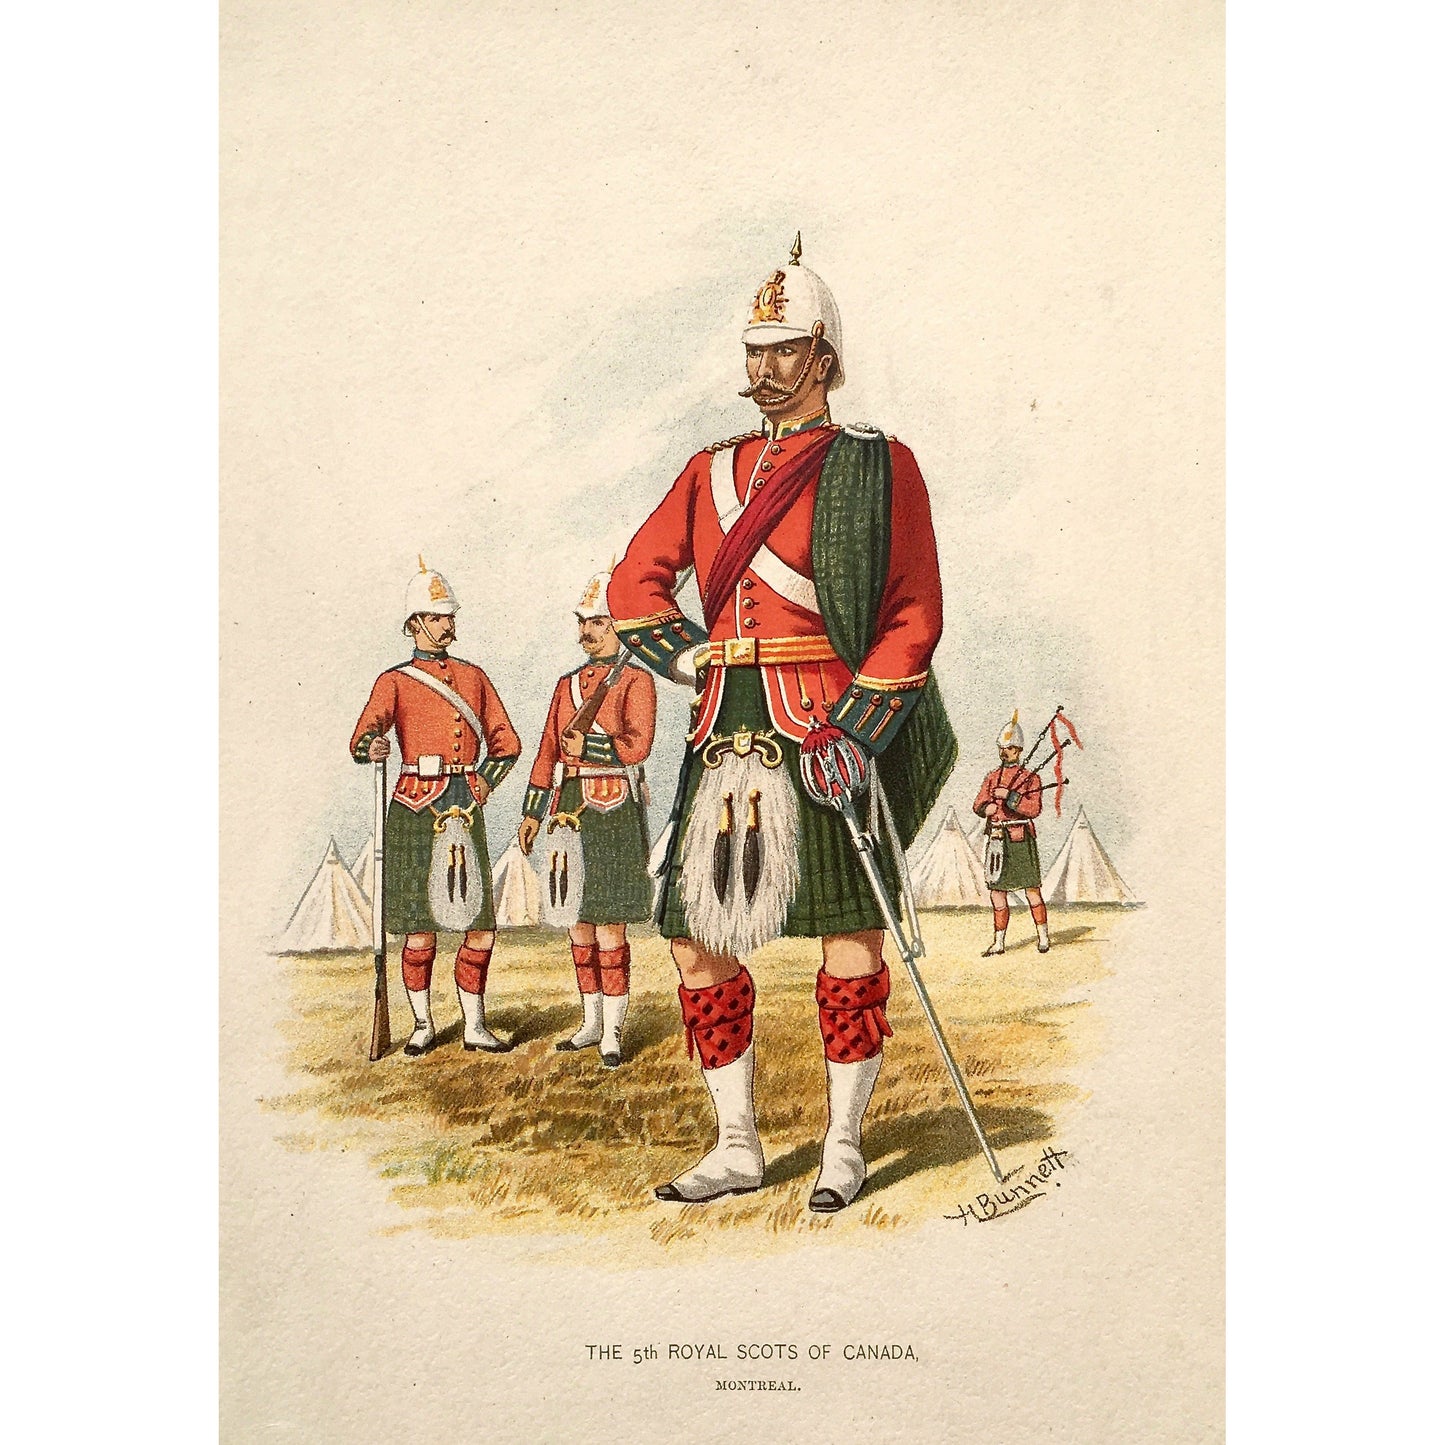 The 5th Royal Scots of Canada, Scots, Royal Scots, Scottish, Scotland, Kilts, bagpipes, Montreal, Canada, Artillery, Military, Military Costume, Horses, Riding, Costume, Uniform, Her Majesty's Army, Regiments, Queen's Forces, H. Bunnett, Bunnett, Sword, Army, London, 1890, Military Prints, Canadian, Canadian Military, Canadian Army, Armed Forces, Military Uniform, Chromolithograph, J. S. Virtue & Co., Antique Prints, Antique, Prints, Original, Original Prints, Art History, Military History, Interior Decor, 